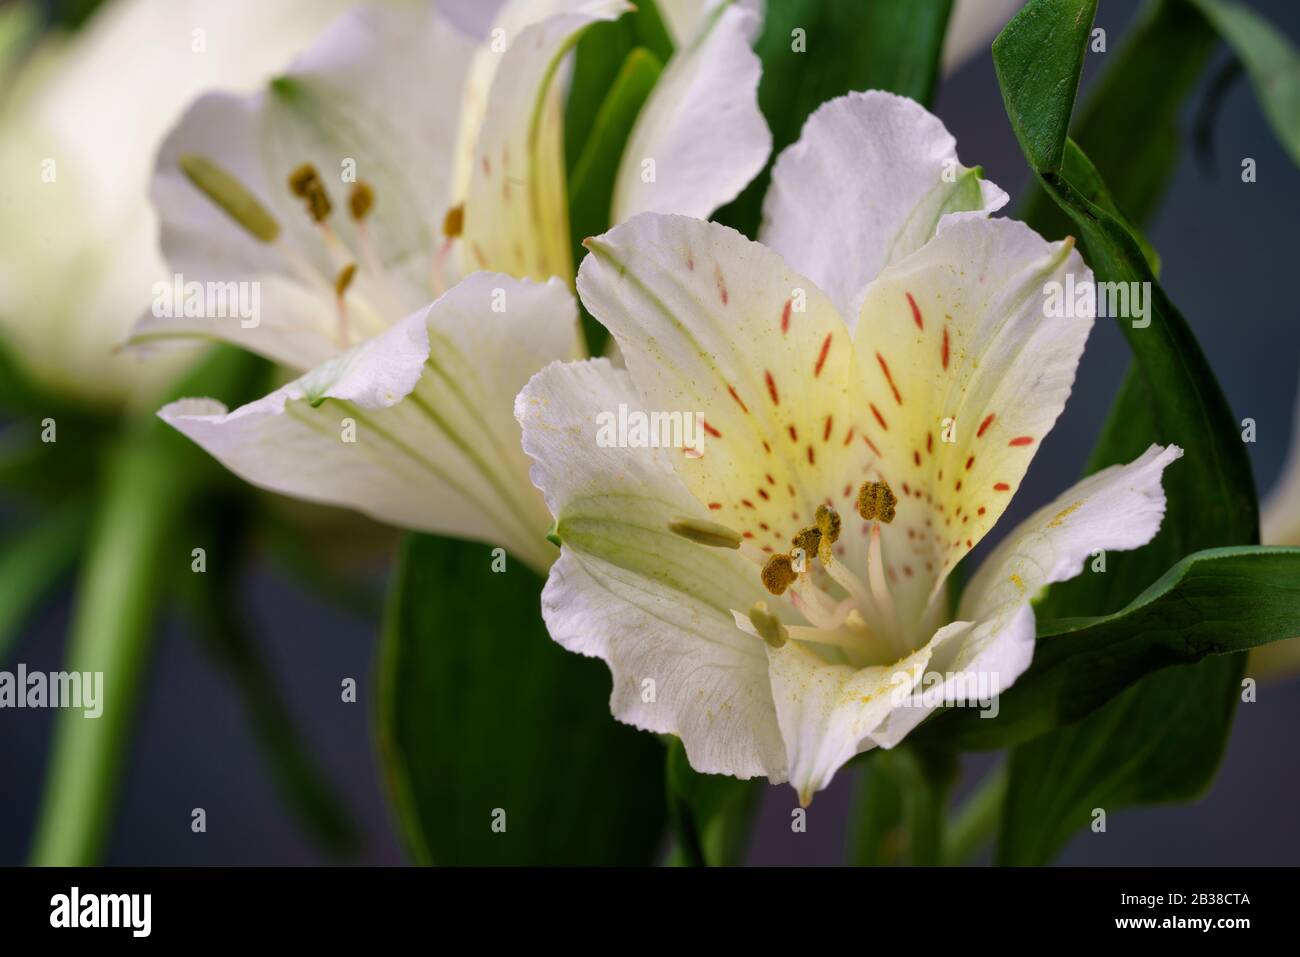 Close up of white lillies which form part of a white flower arrangement Stock Photo